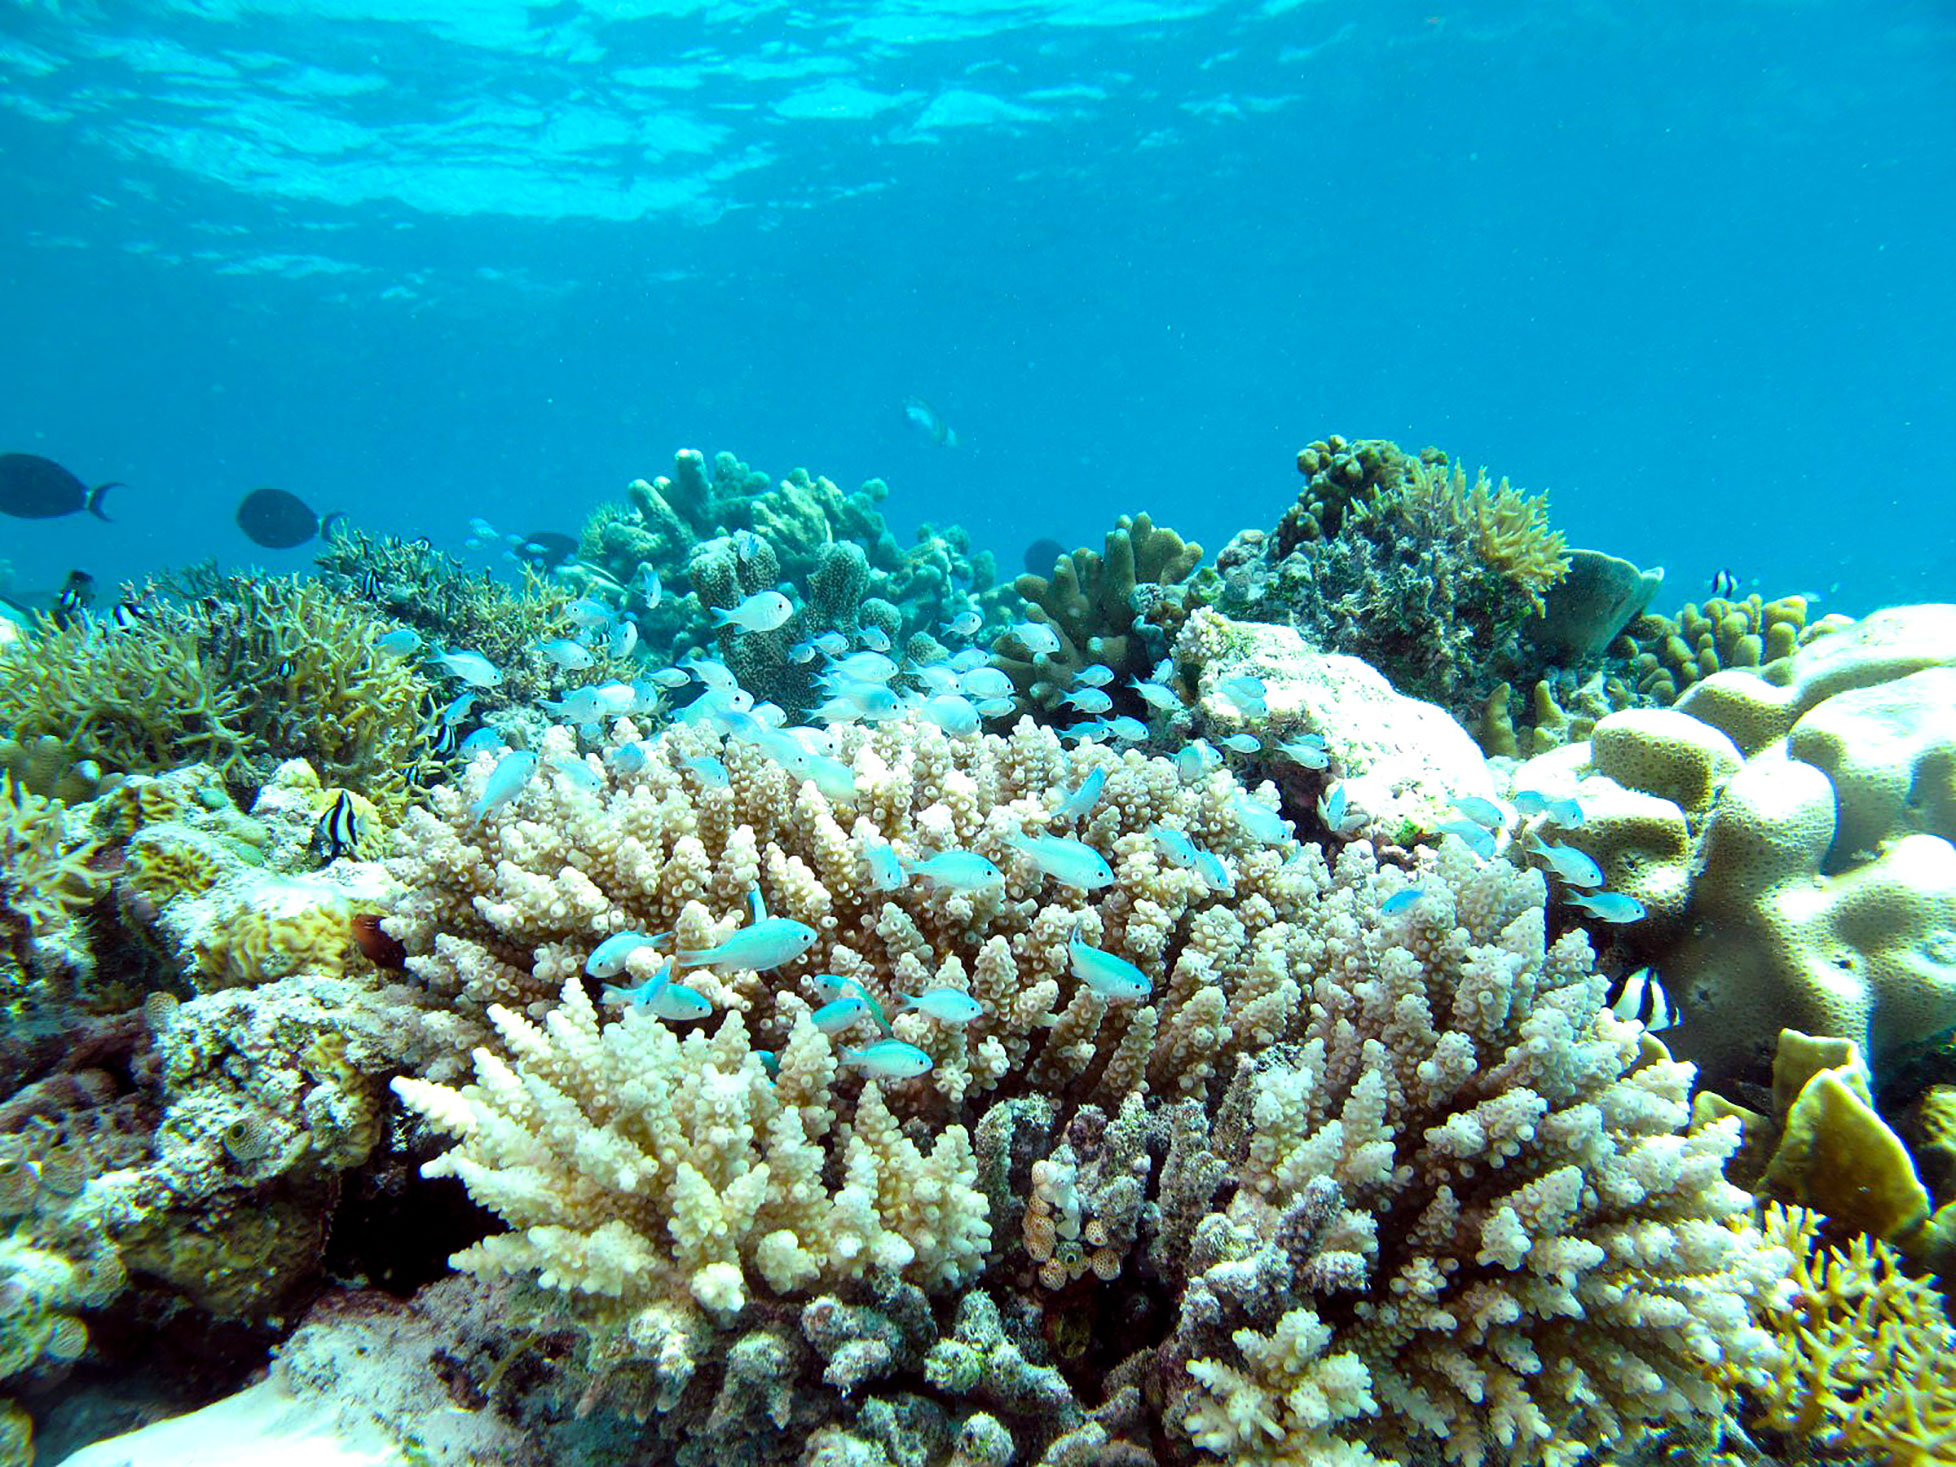 Overview of the biodiversity of coral ecosystems in the south-west Indian Ocean (Reunion Island).